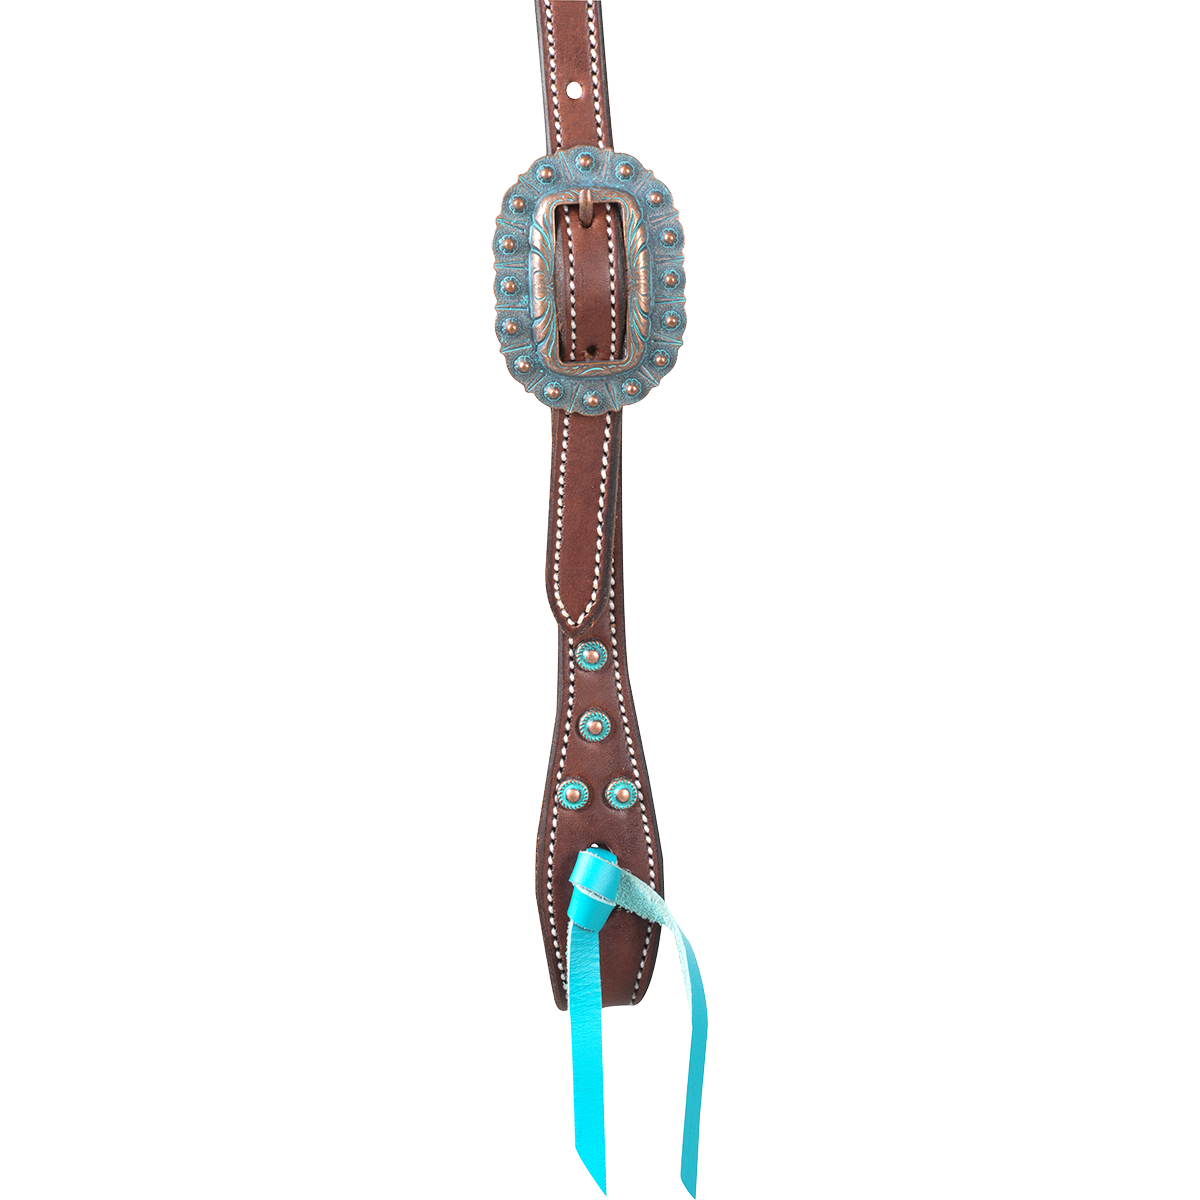 Martin Slip Ear Headstall with Turquoise and Copper Dot Buckles